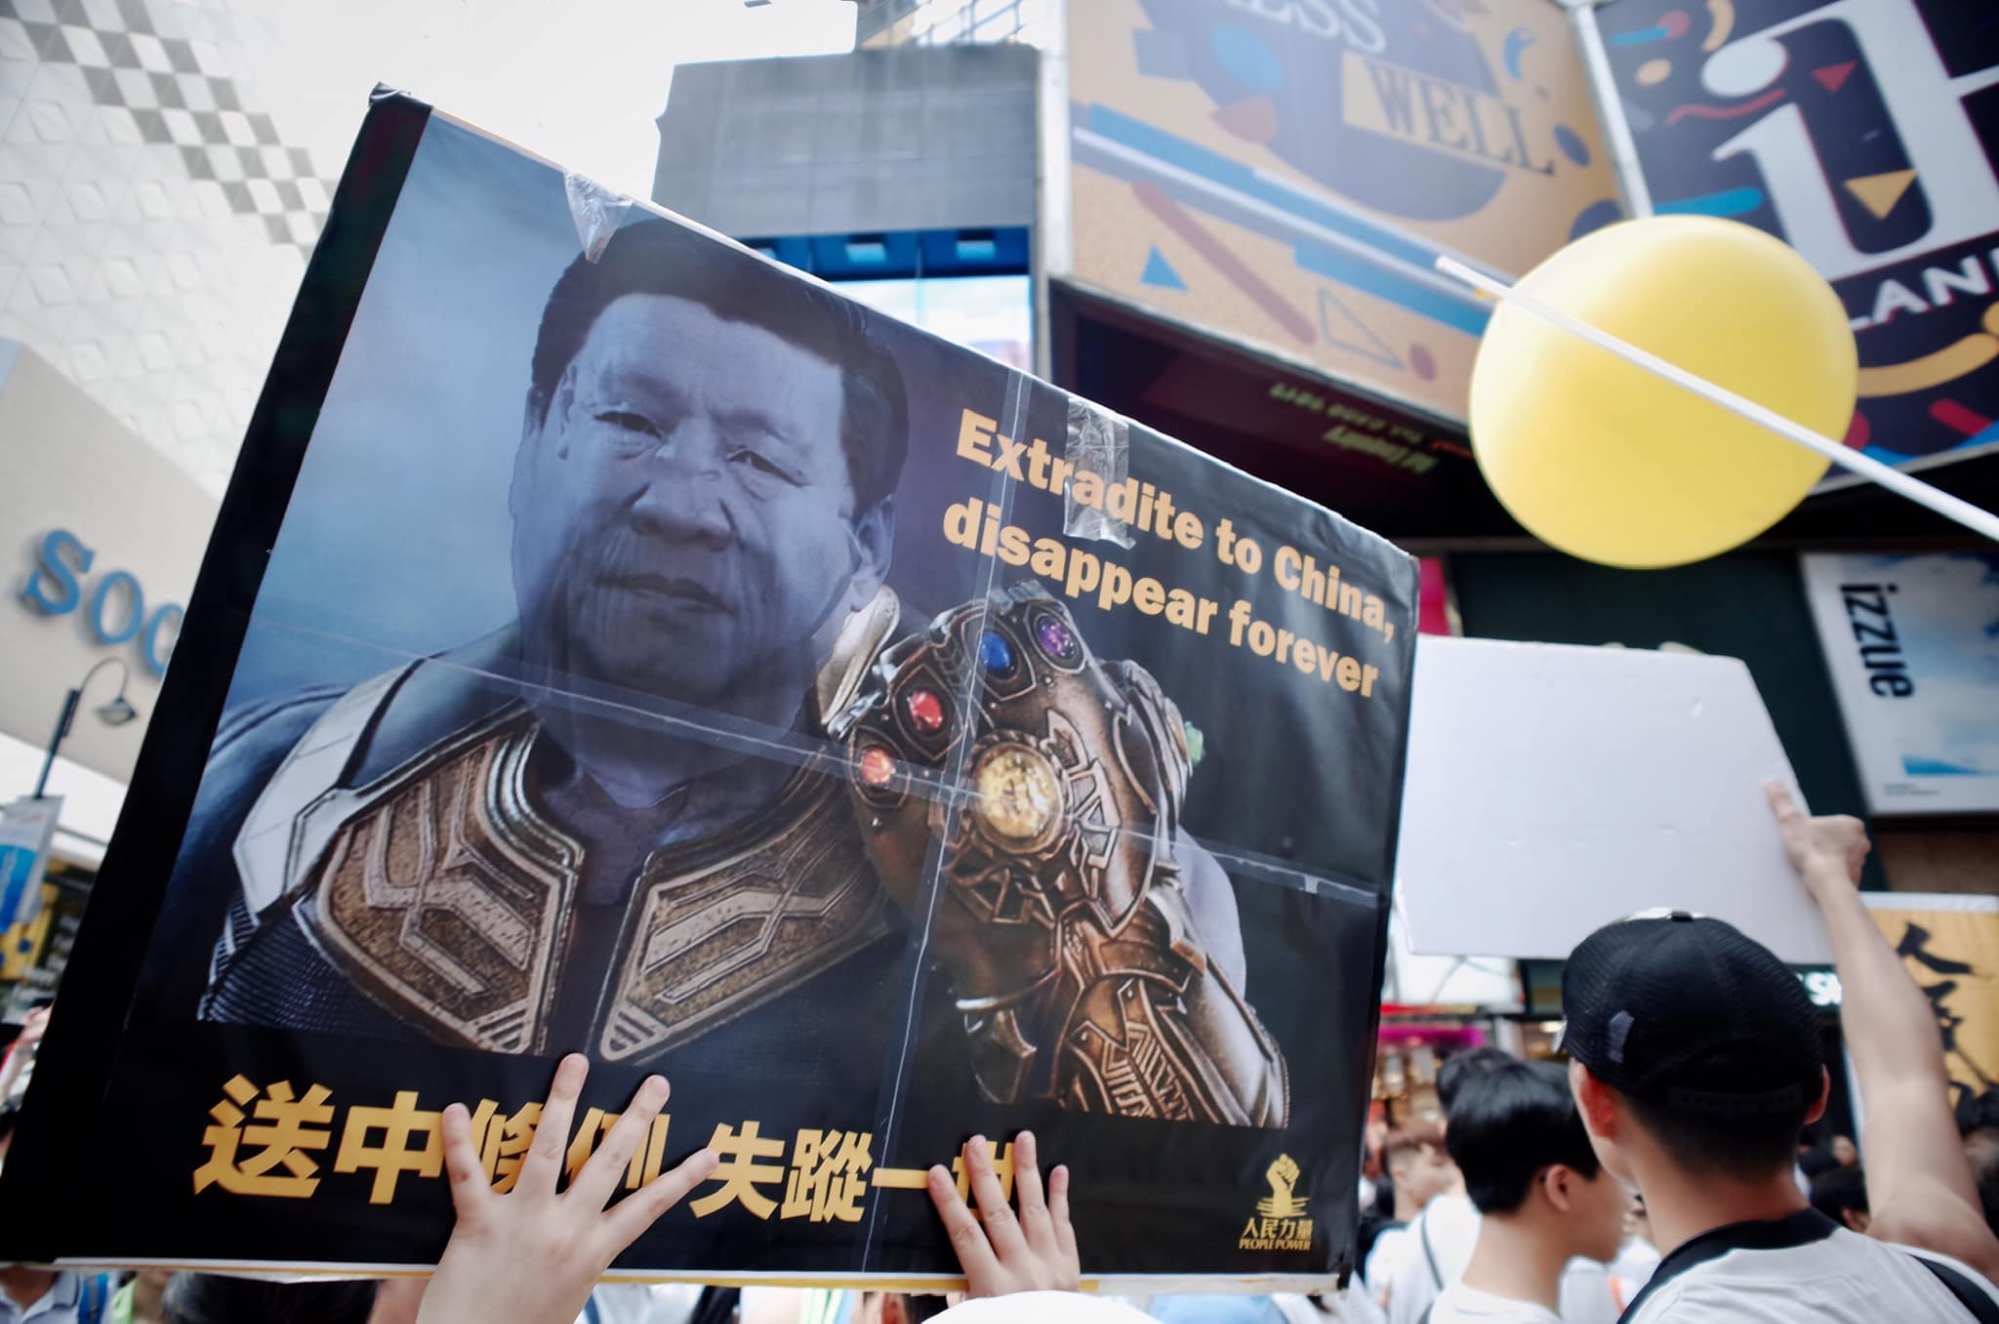 When President Xi Jinping wields the Infinity Gauntlet, protesters fear the worst. (Picture: People Power via Facebook)